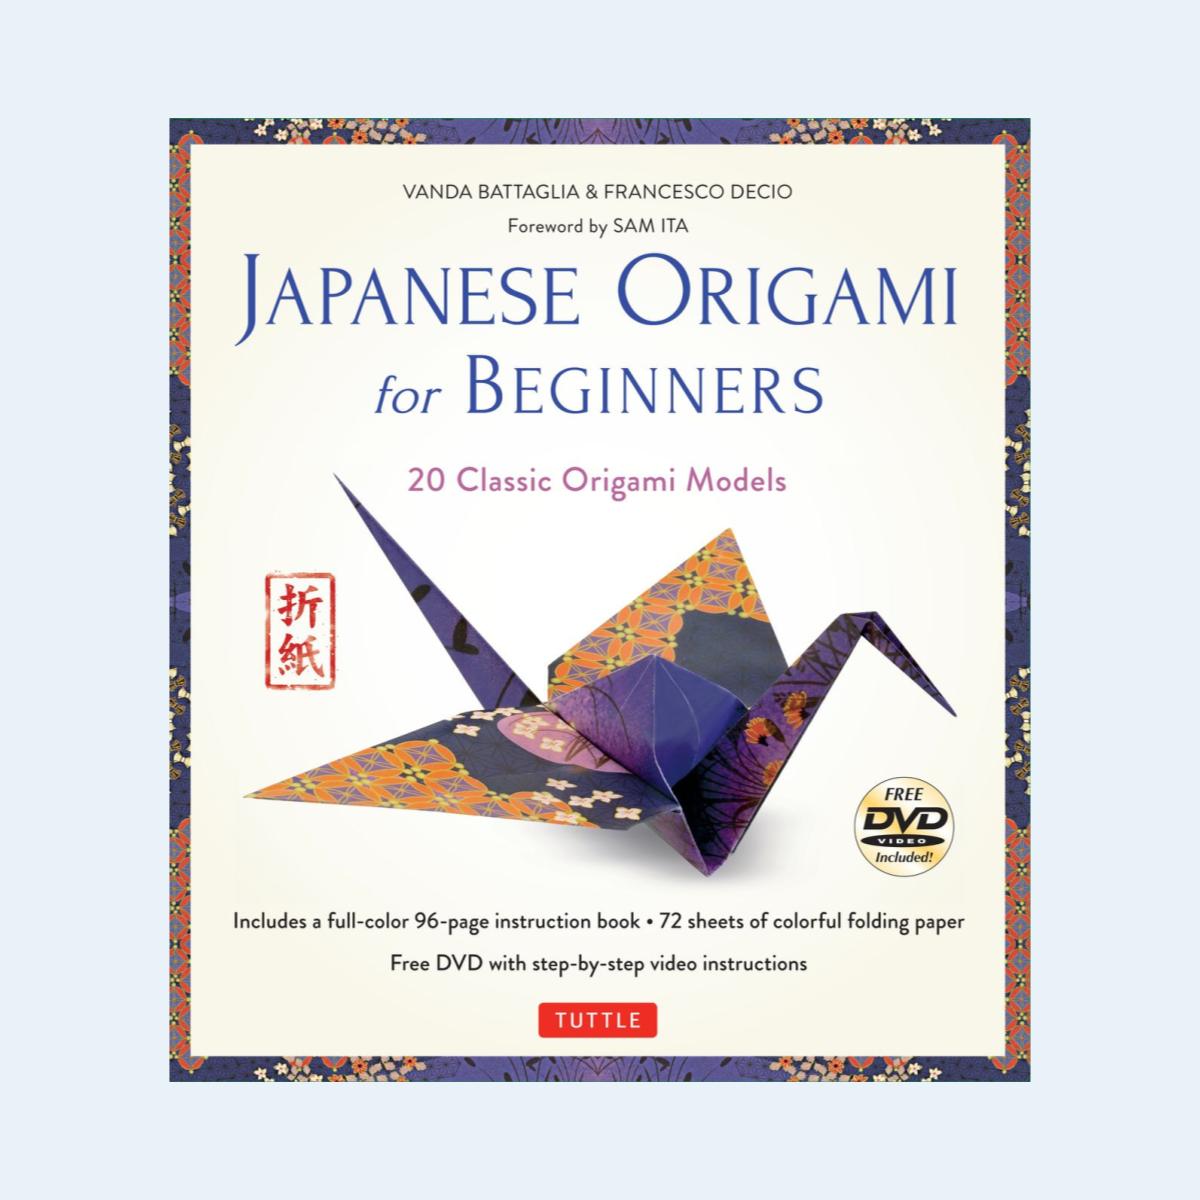 Japanese Origami for Beginners Kit: 20 Classic Origami Models: Kit with Origami Book, 72 High-Quality Origami Papers and Instructional DVD: Great for Kids and Adults!